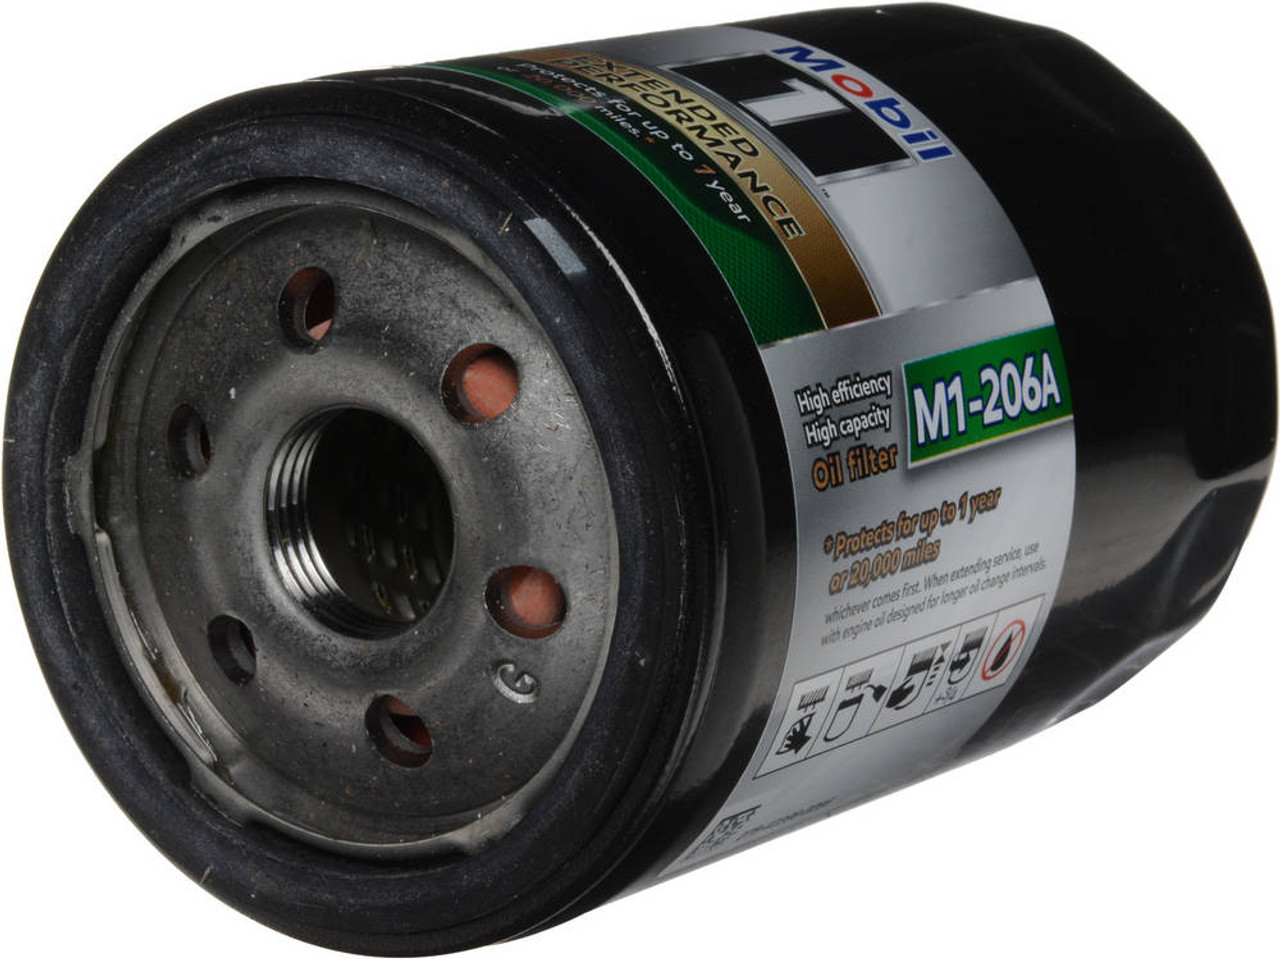 Mobil 1 Mobil 1 Extended Perform ance Oil Filter M1-206A - MOBM1-206A